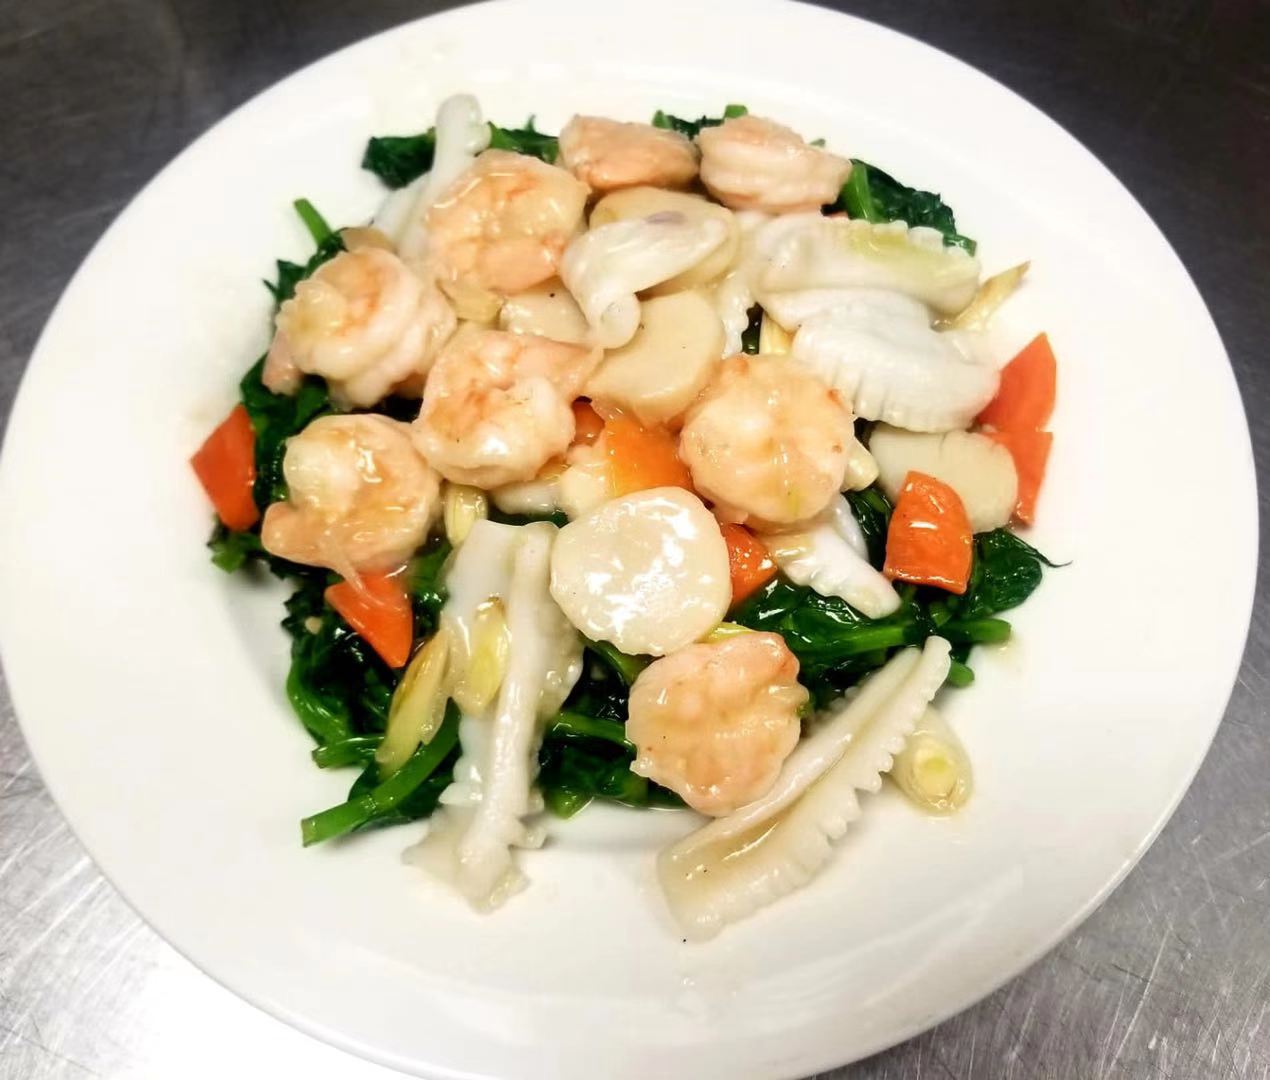 142. Shrimp, Scallops and Squid with Vegetables